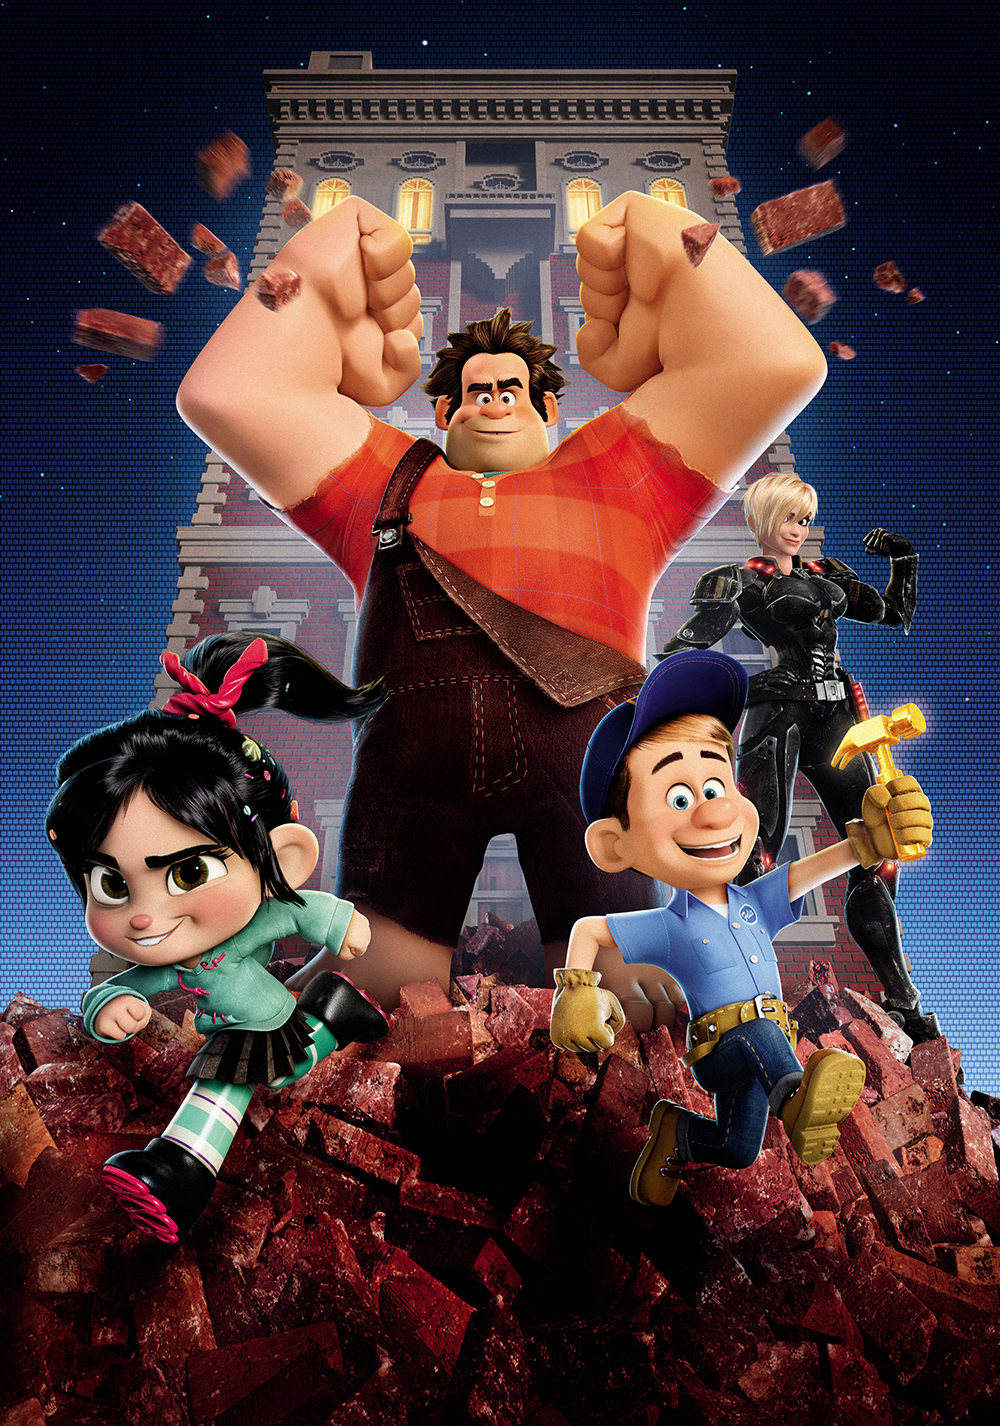 Wreck-It Ralph Images. 